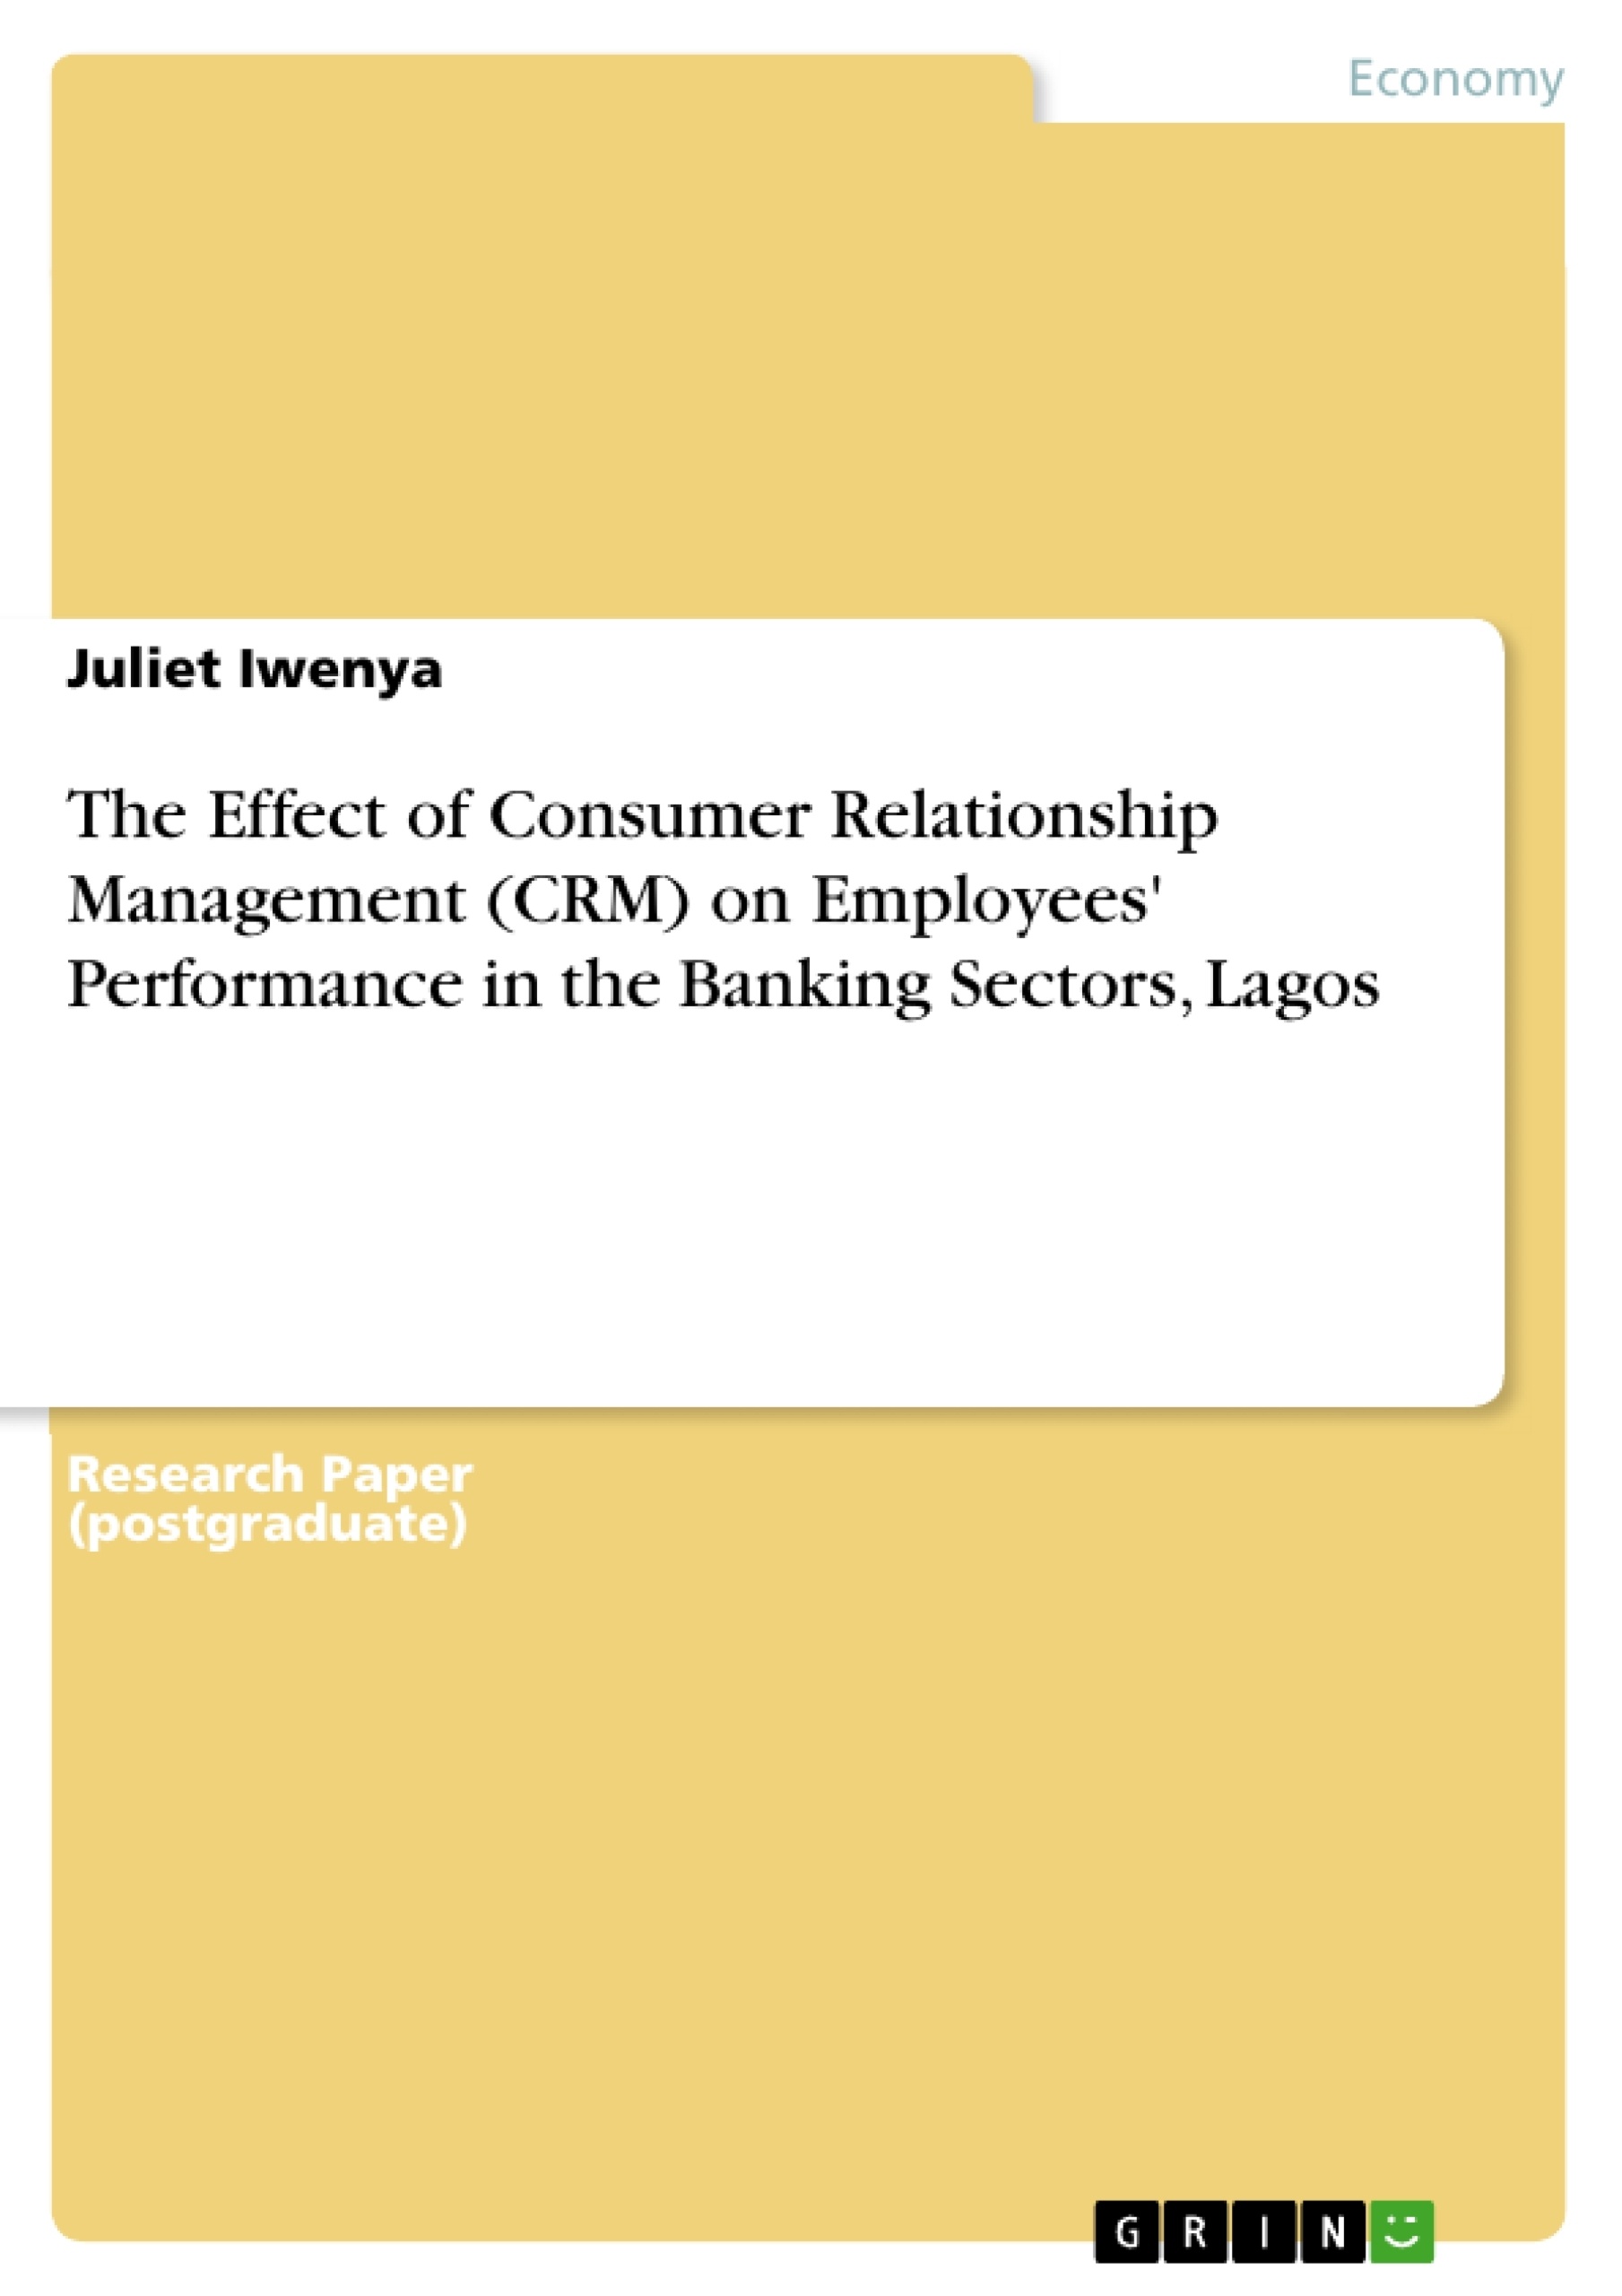 Titre: The Effect of Consumer Relationship Management (CRM) on Employees' Performance in the Banking Sectors, Lagos